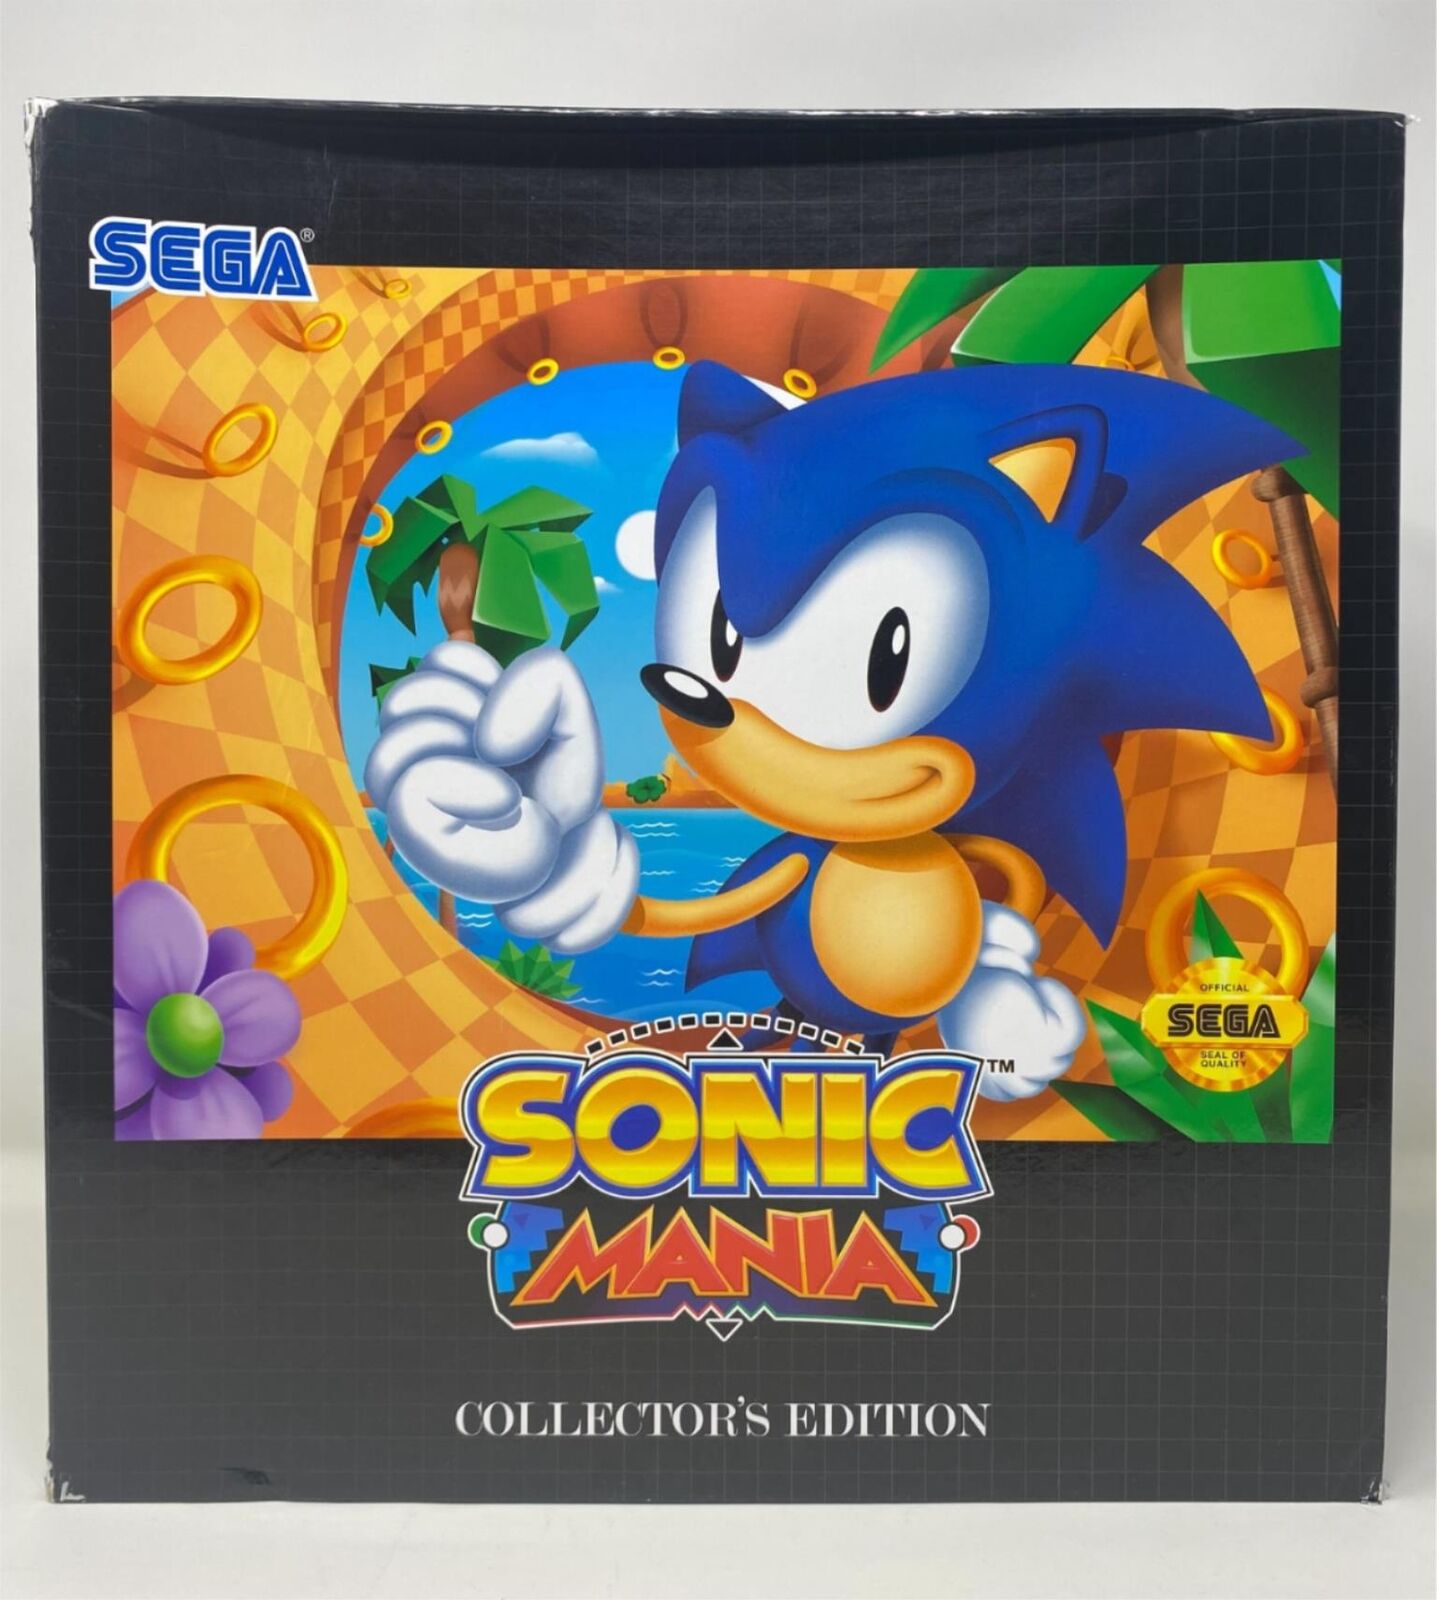 SEGA: Sonic Mania Collector's Edition - Game Not Included  [USED - ACCEPTABLE]